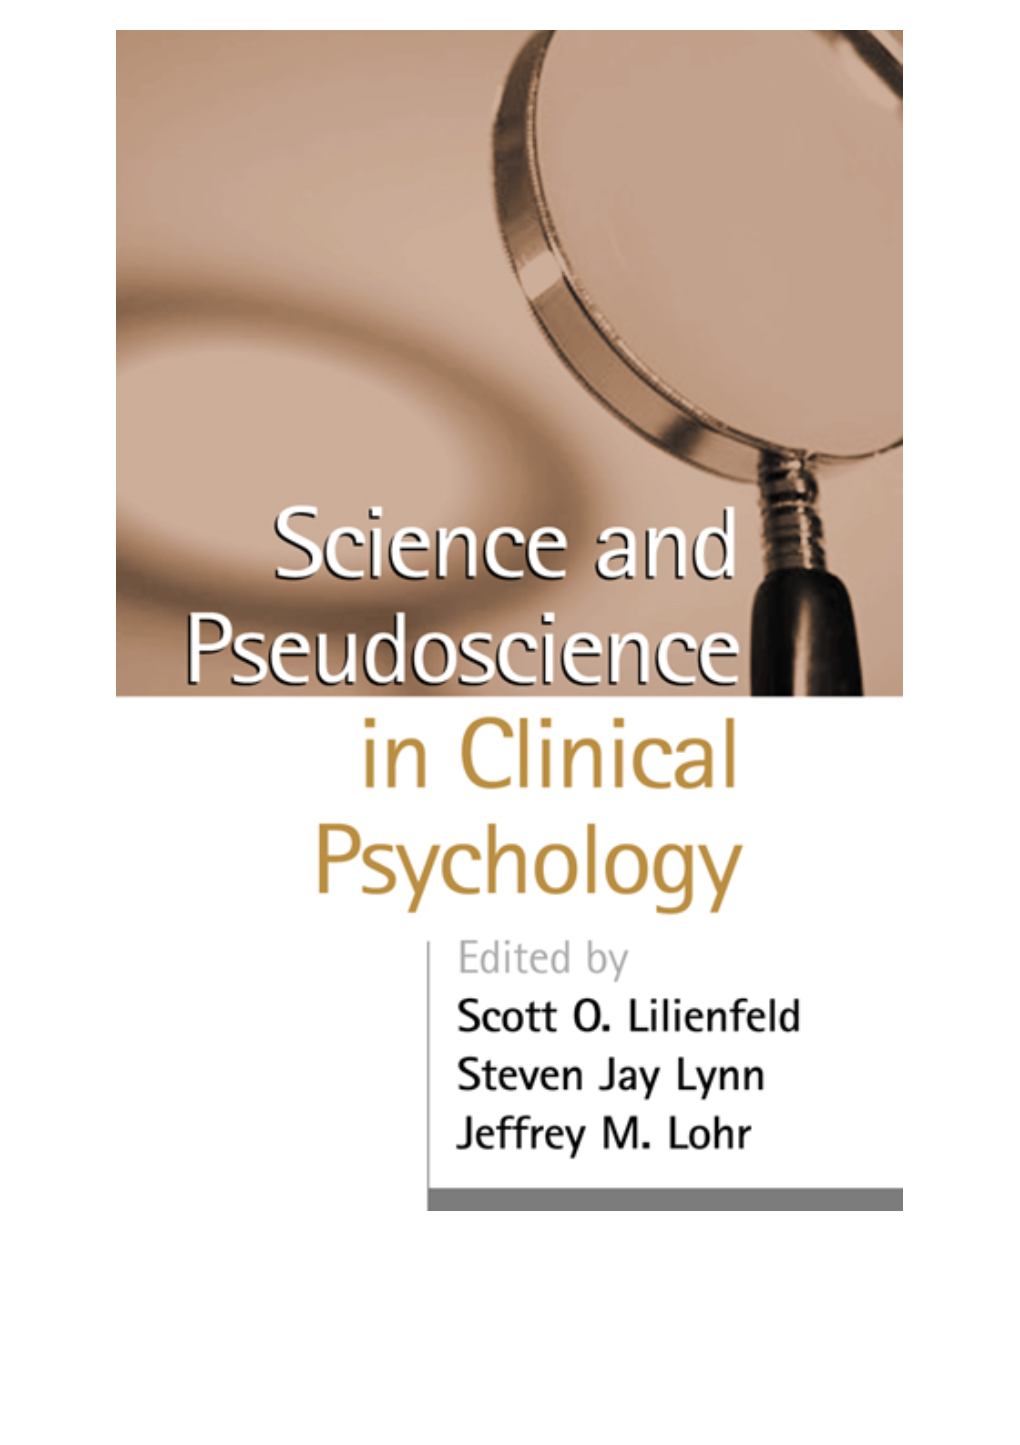 Science and Pseudoscience in Clinical Psychology Edited by SCOTT O